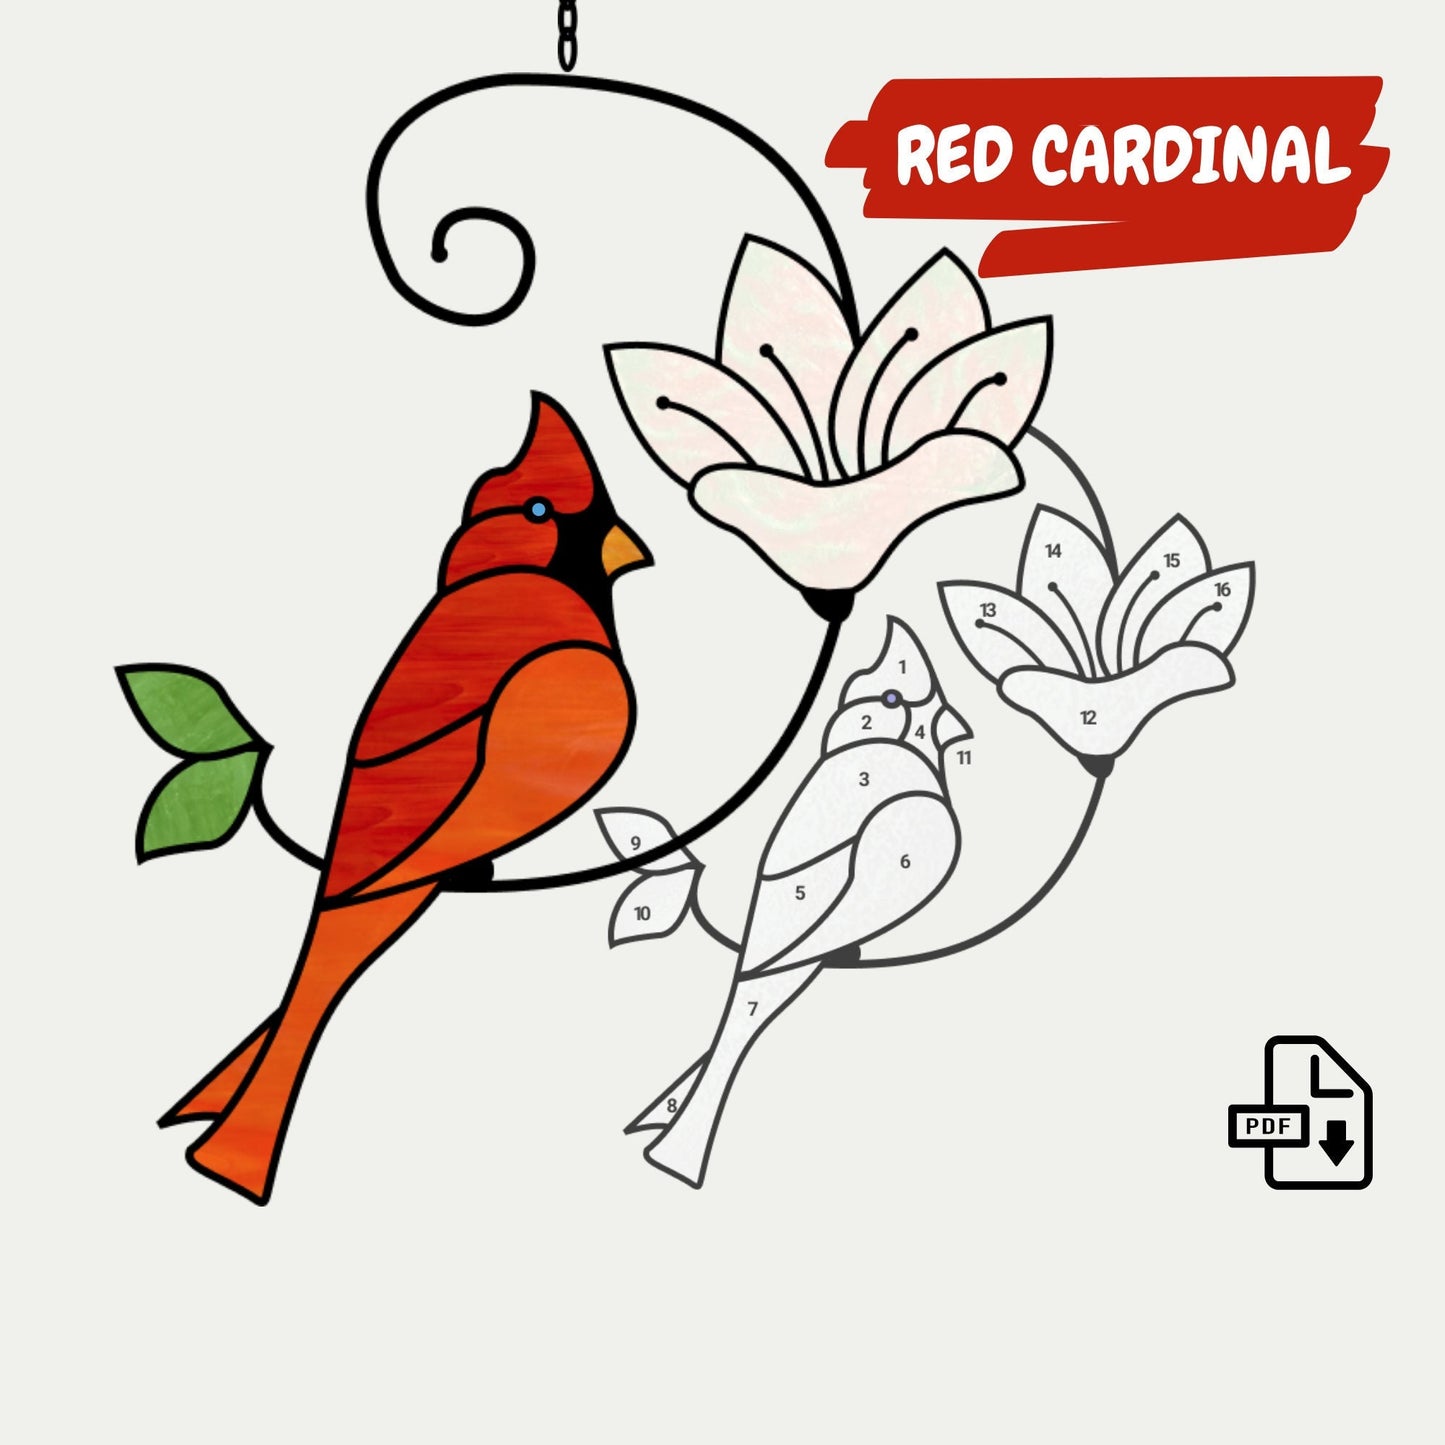 Red Cardinal Stained Glass Suncatcher Pattern